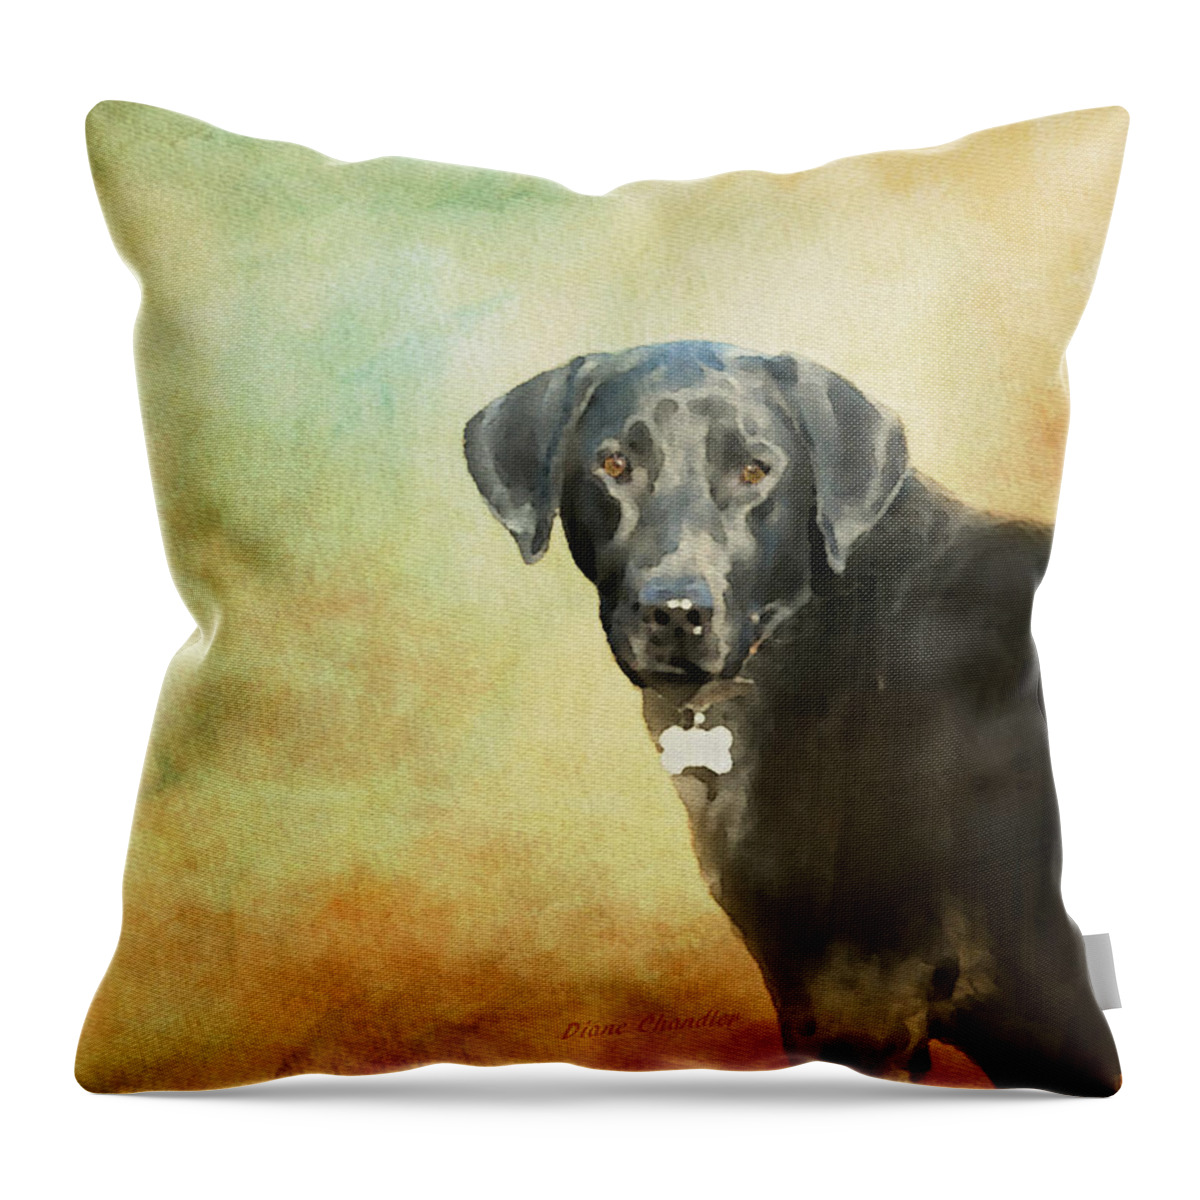 Dog Throw Pillow featuring the painting Portrait of a Black Labrador Retriever by Diane Chandler